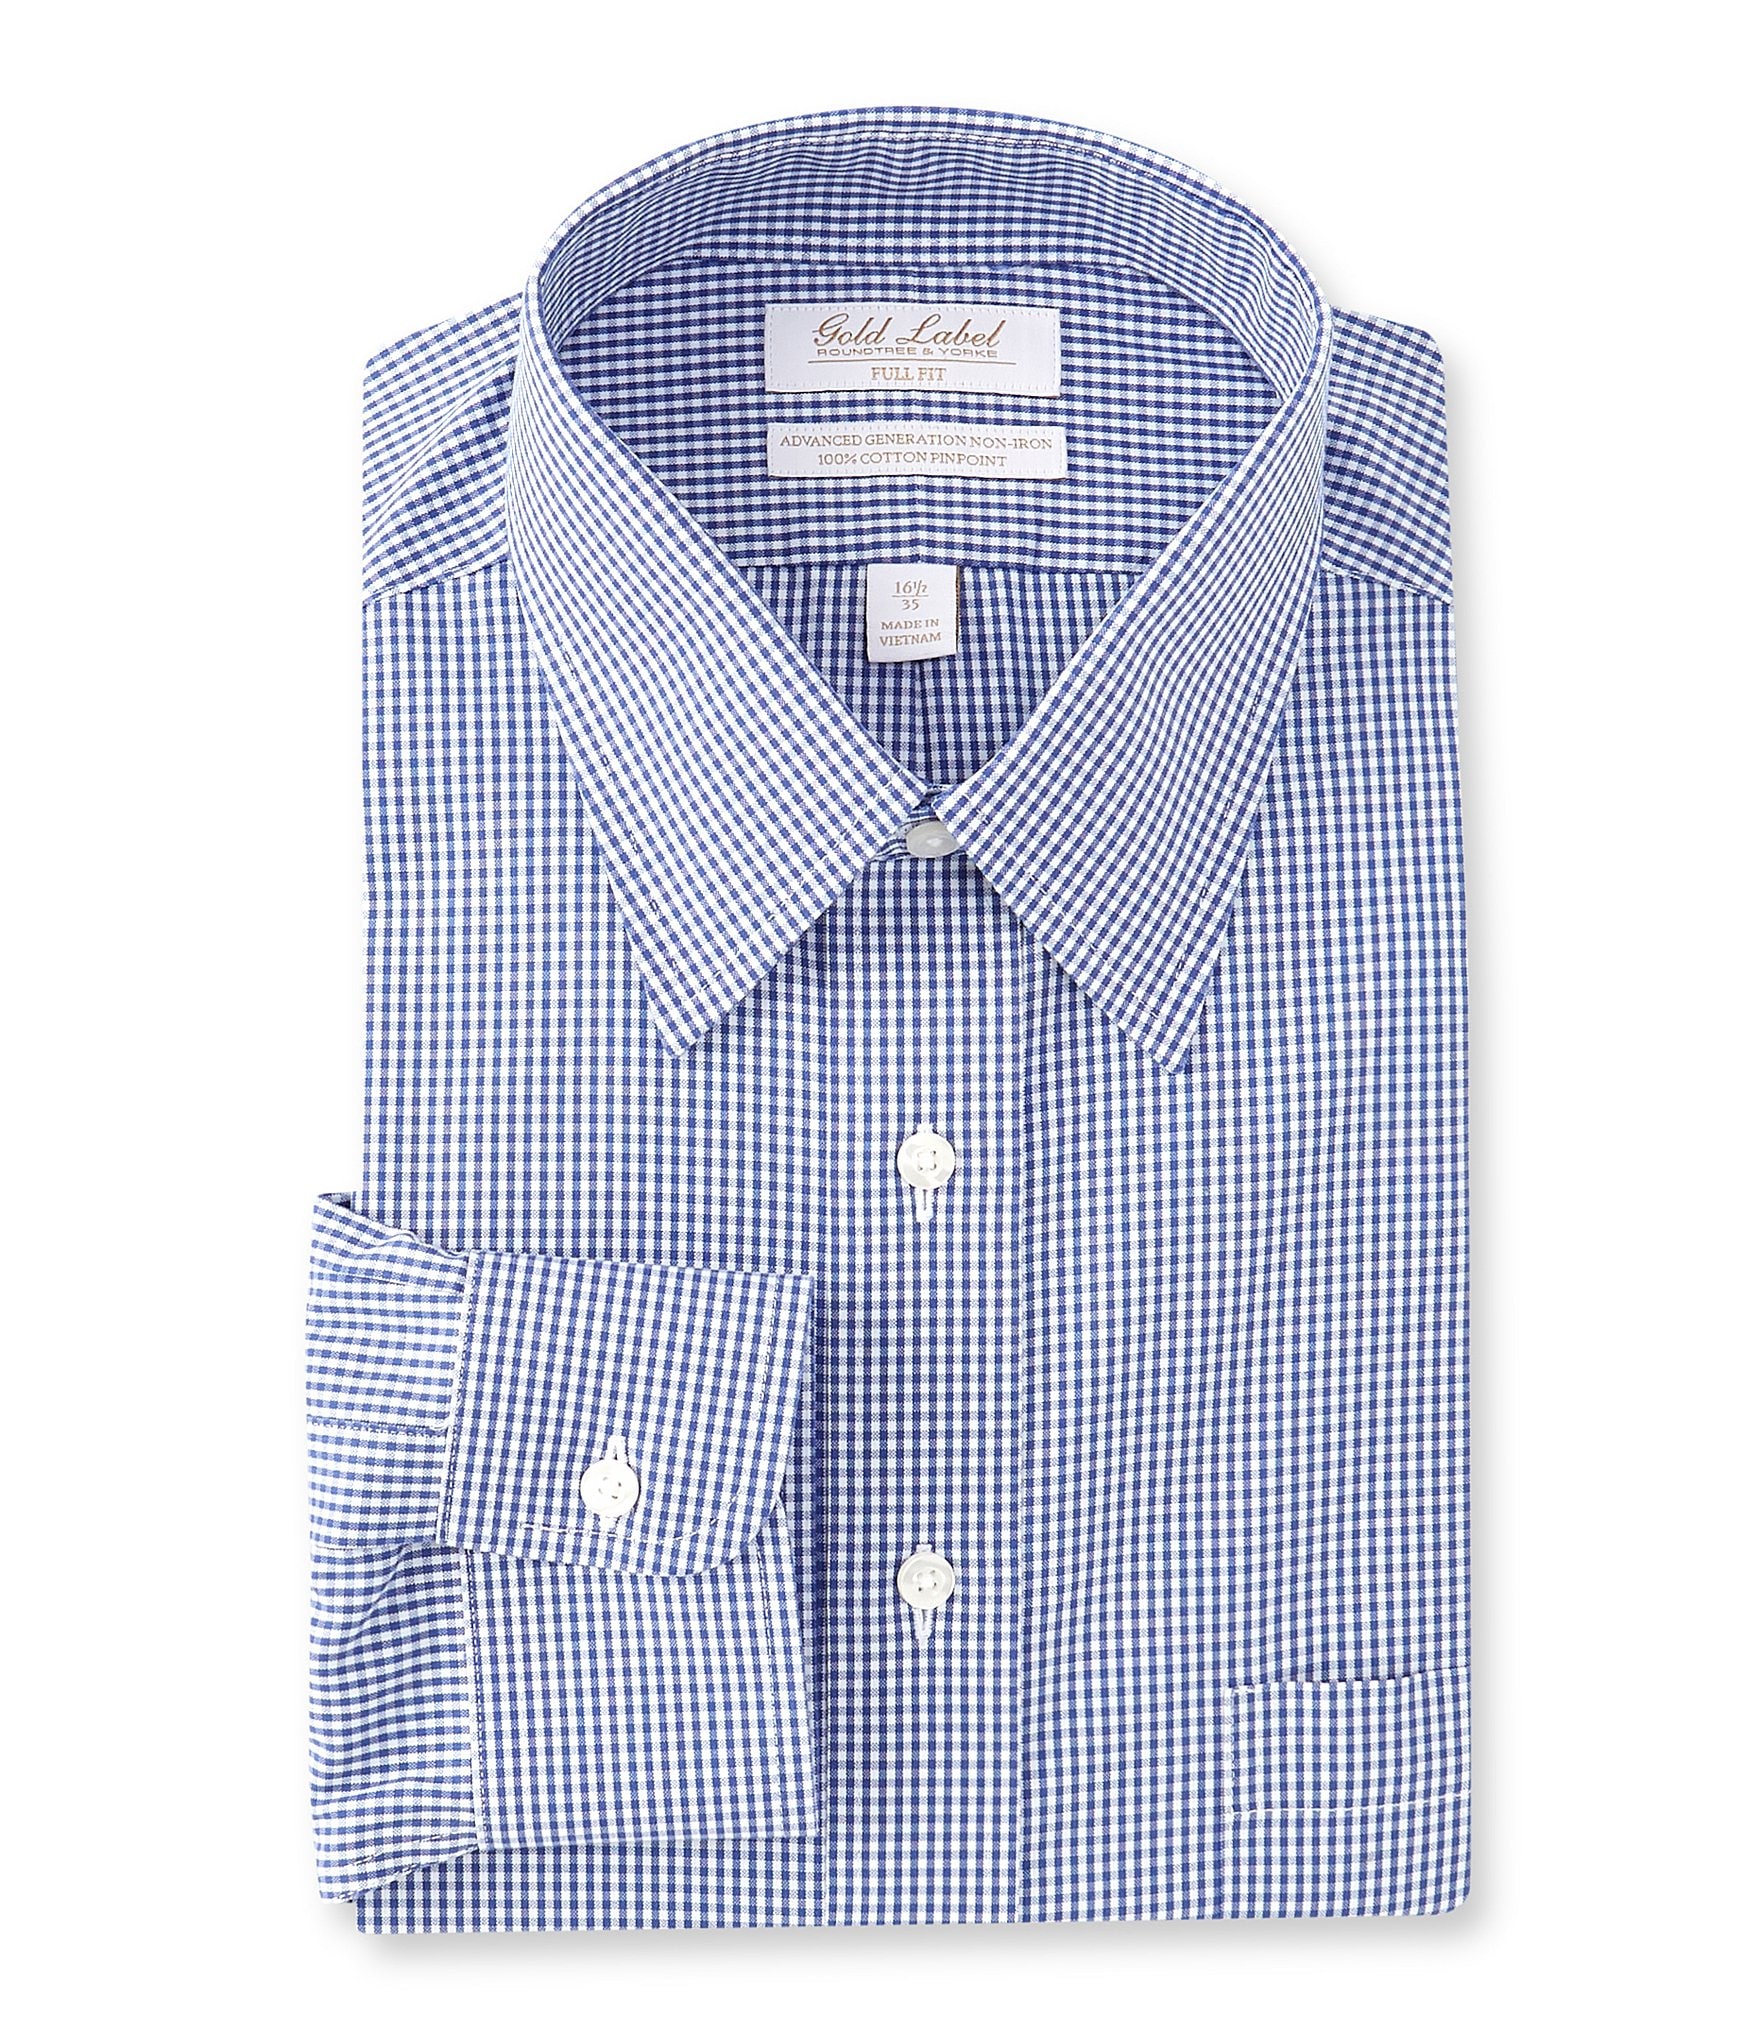 Gold Label Roundtree & Yorke Full Fit Non-Iron Point Collar Gingham ...